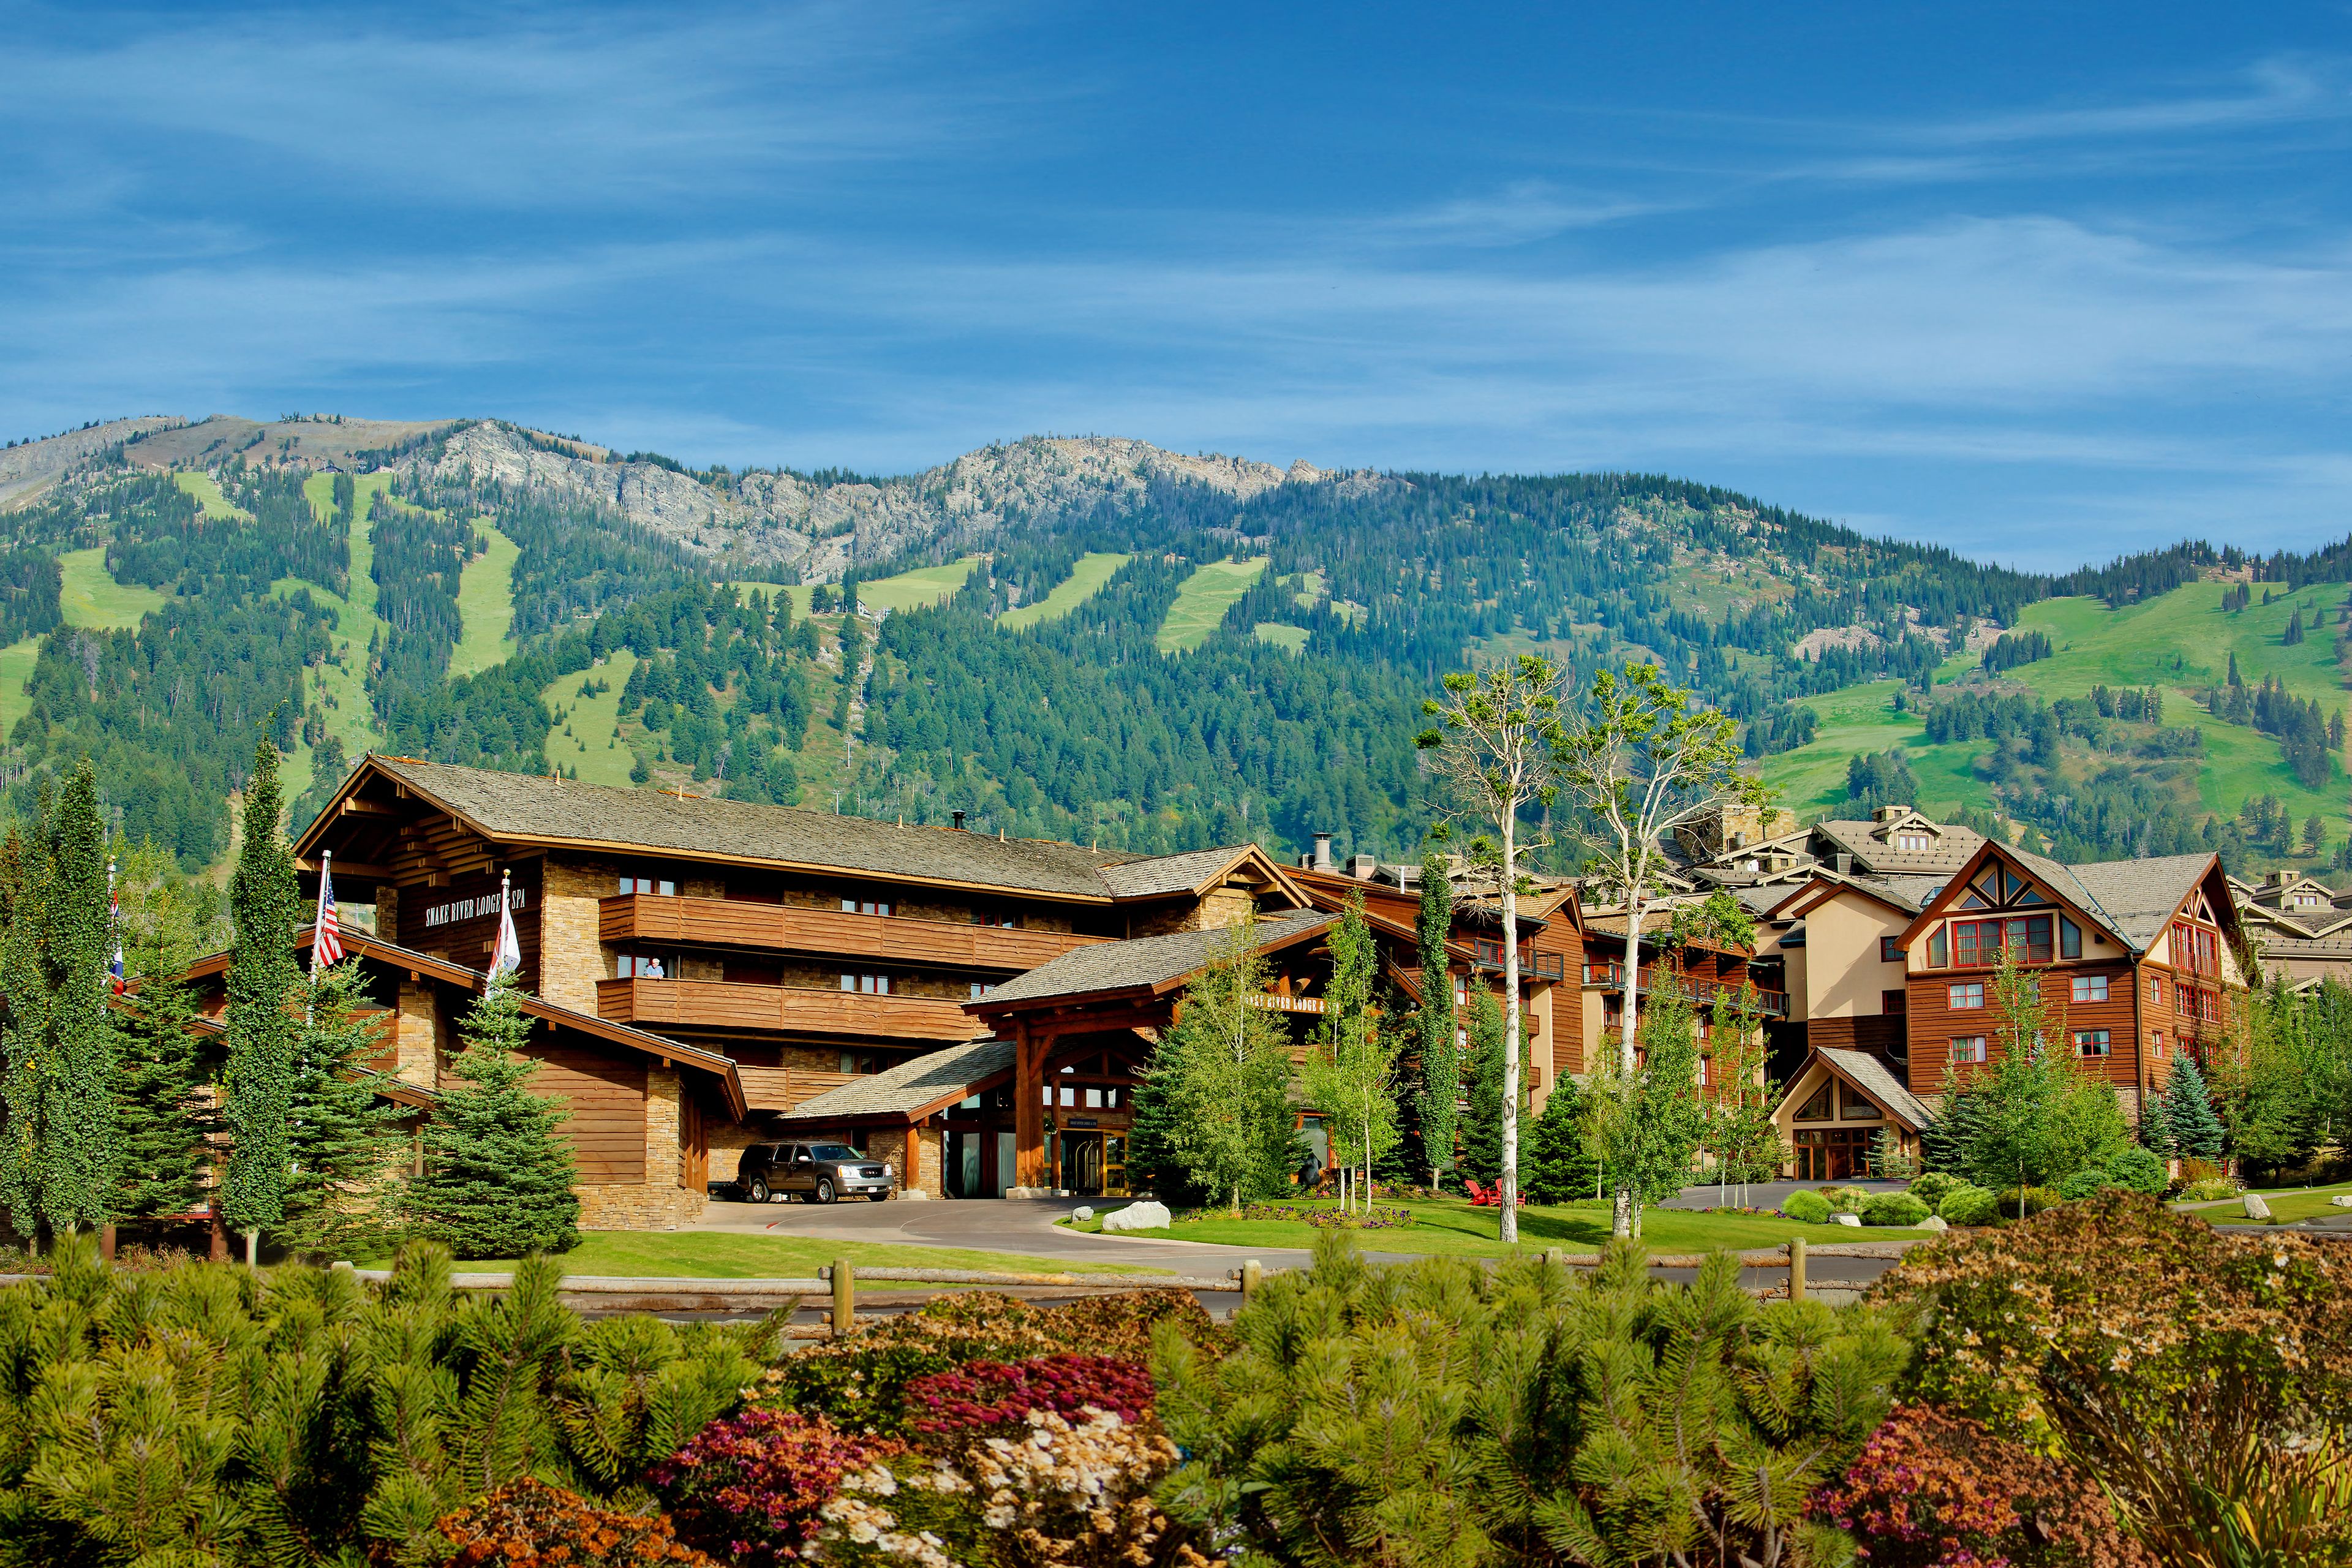 Building view of Snake River Lodge & Spa